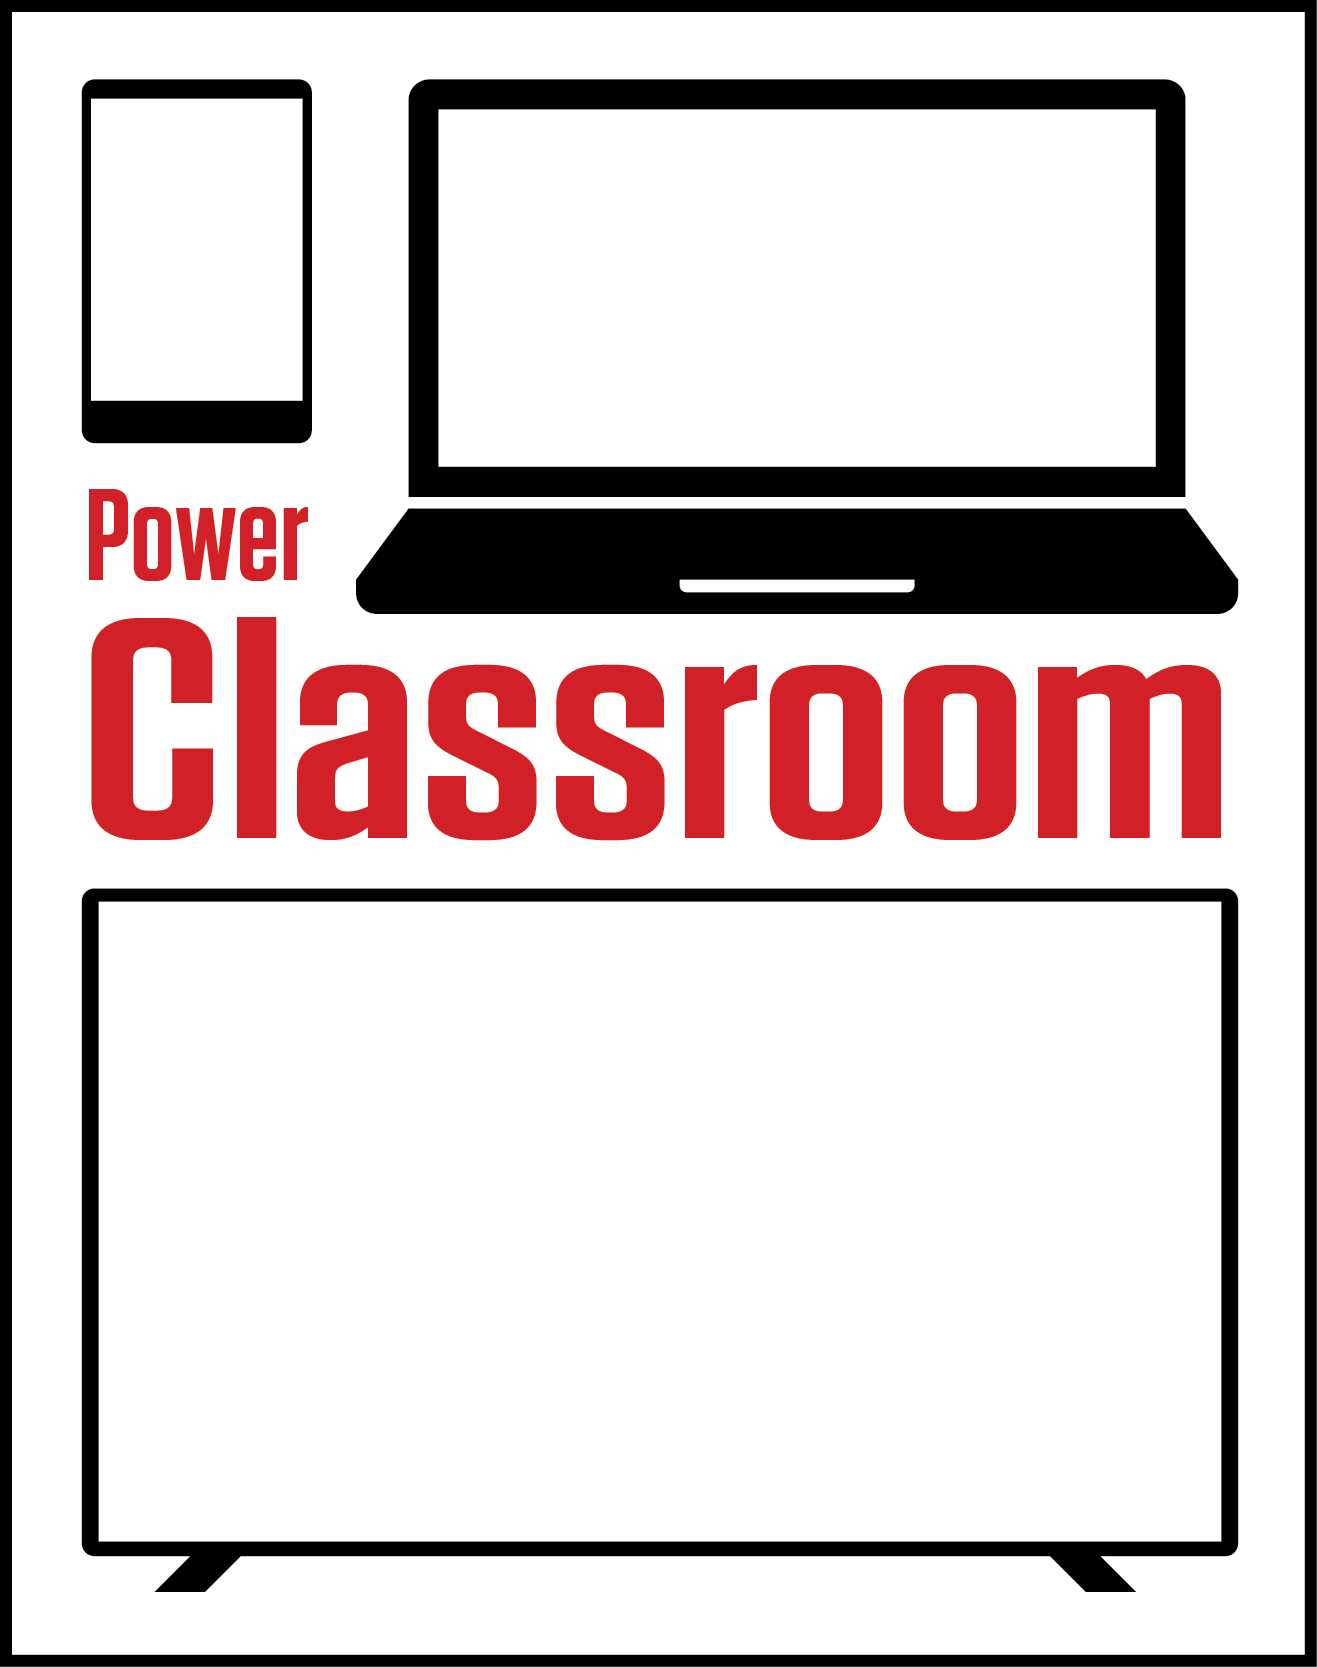 Power Classroom is a series of training events aimed at helping instructors better utilize the campus technology available in the classroom.